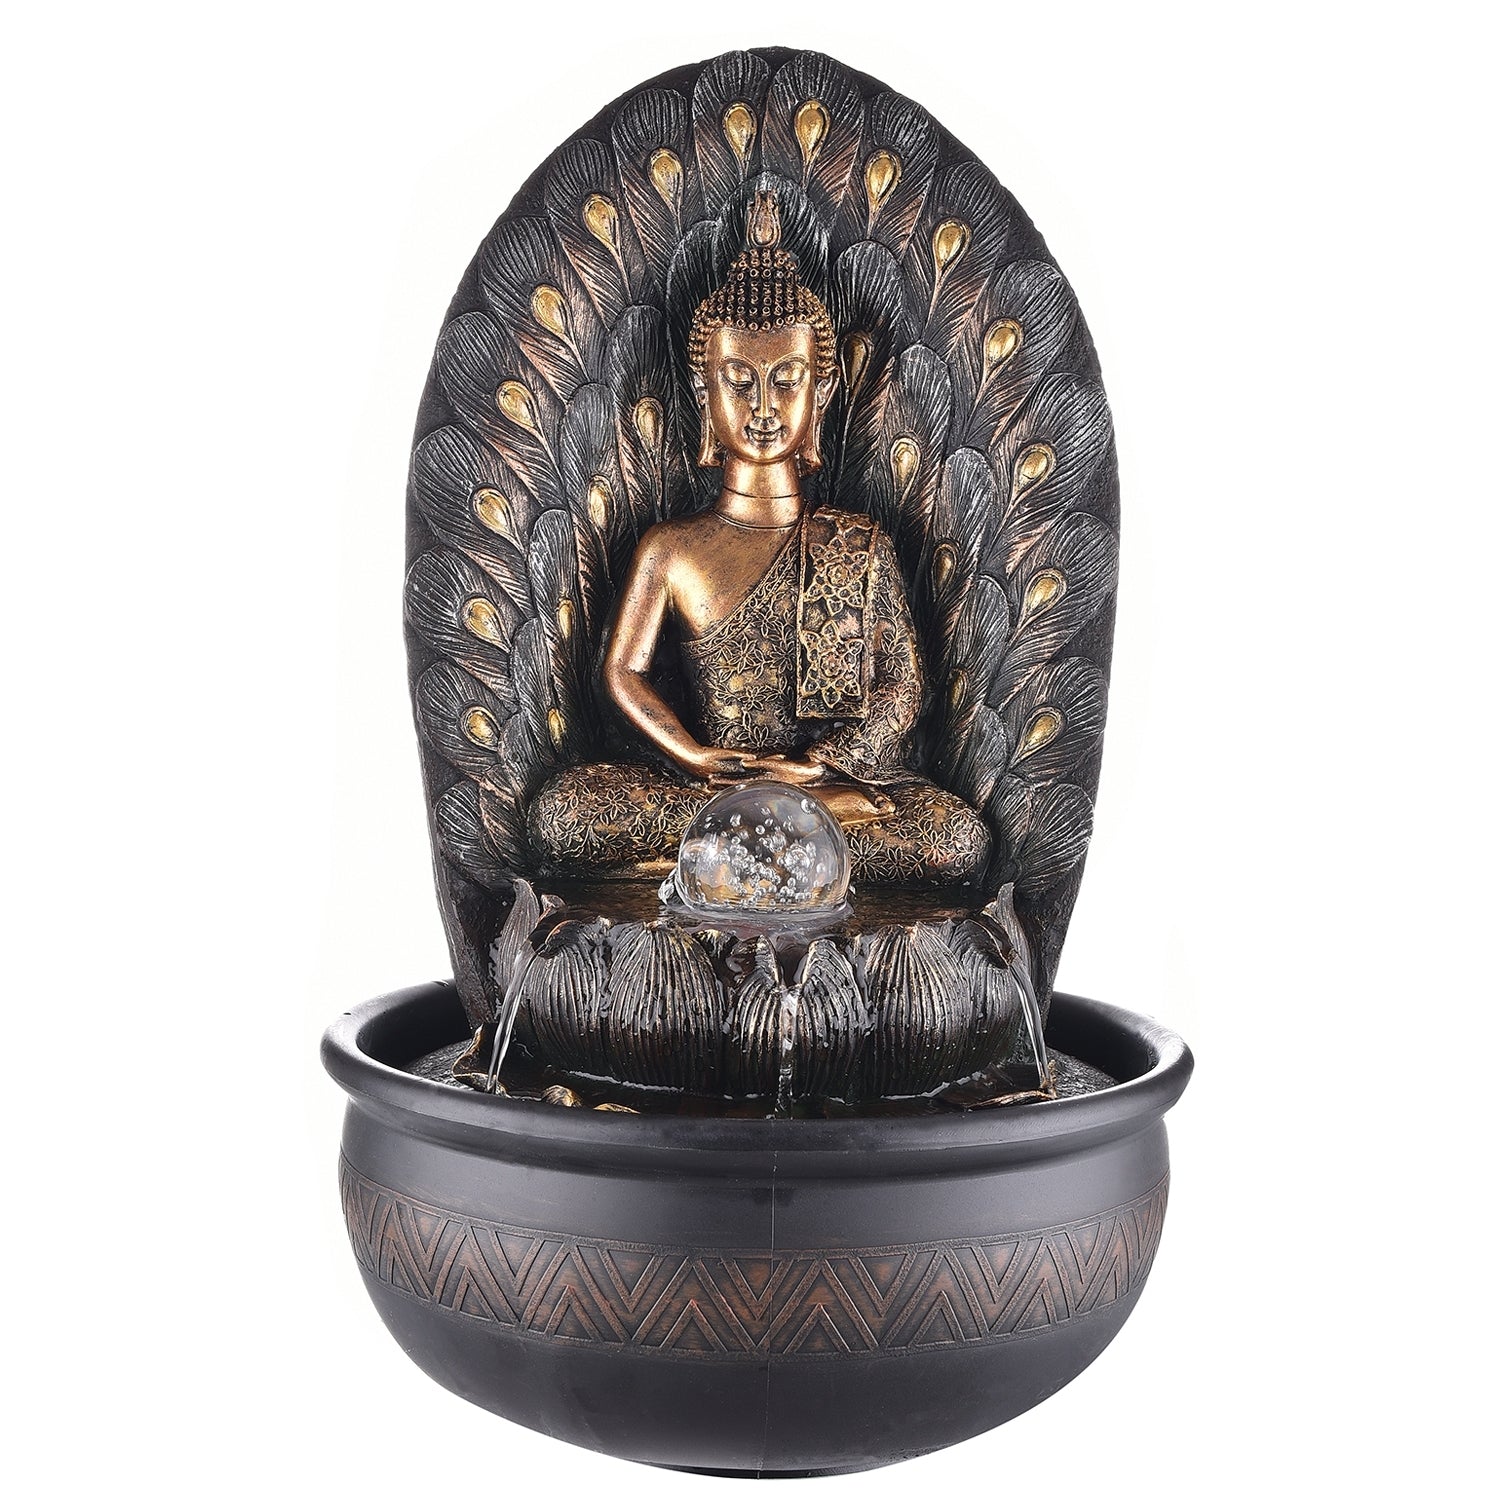 Polystone Leaf Textured Brown and Golden Meditating Buddha Idol Water Fountain With Crystal Ball for Home/Office Decor 4